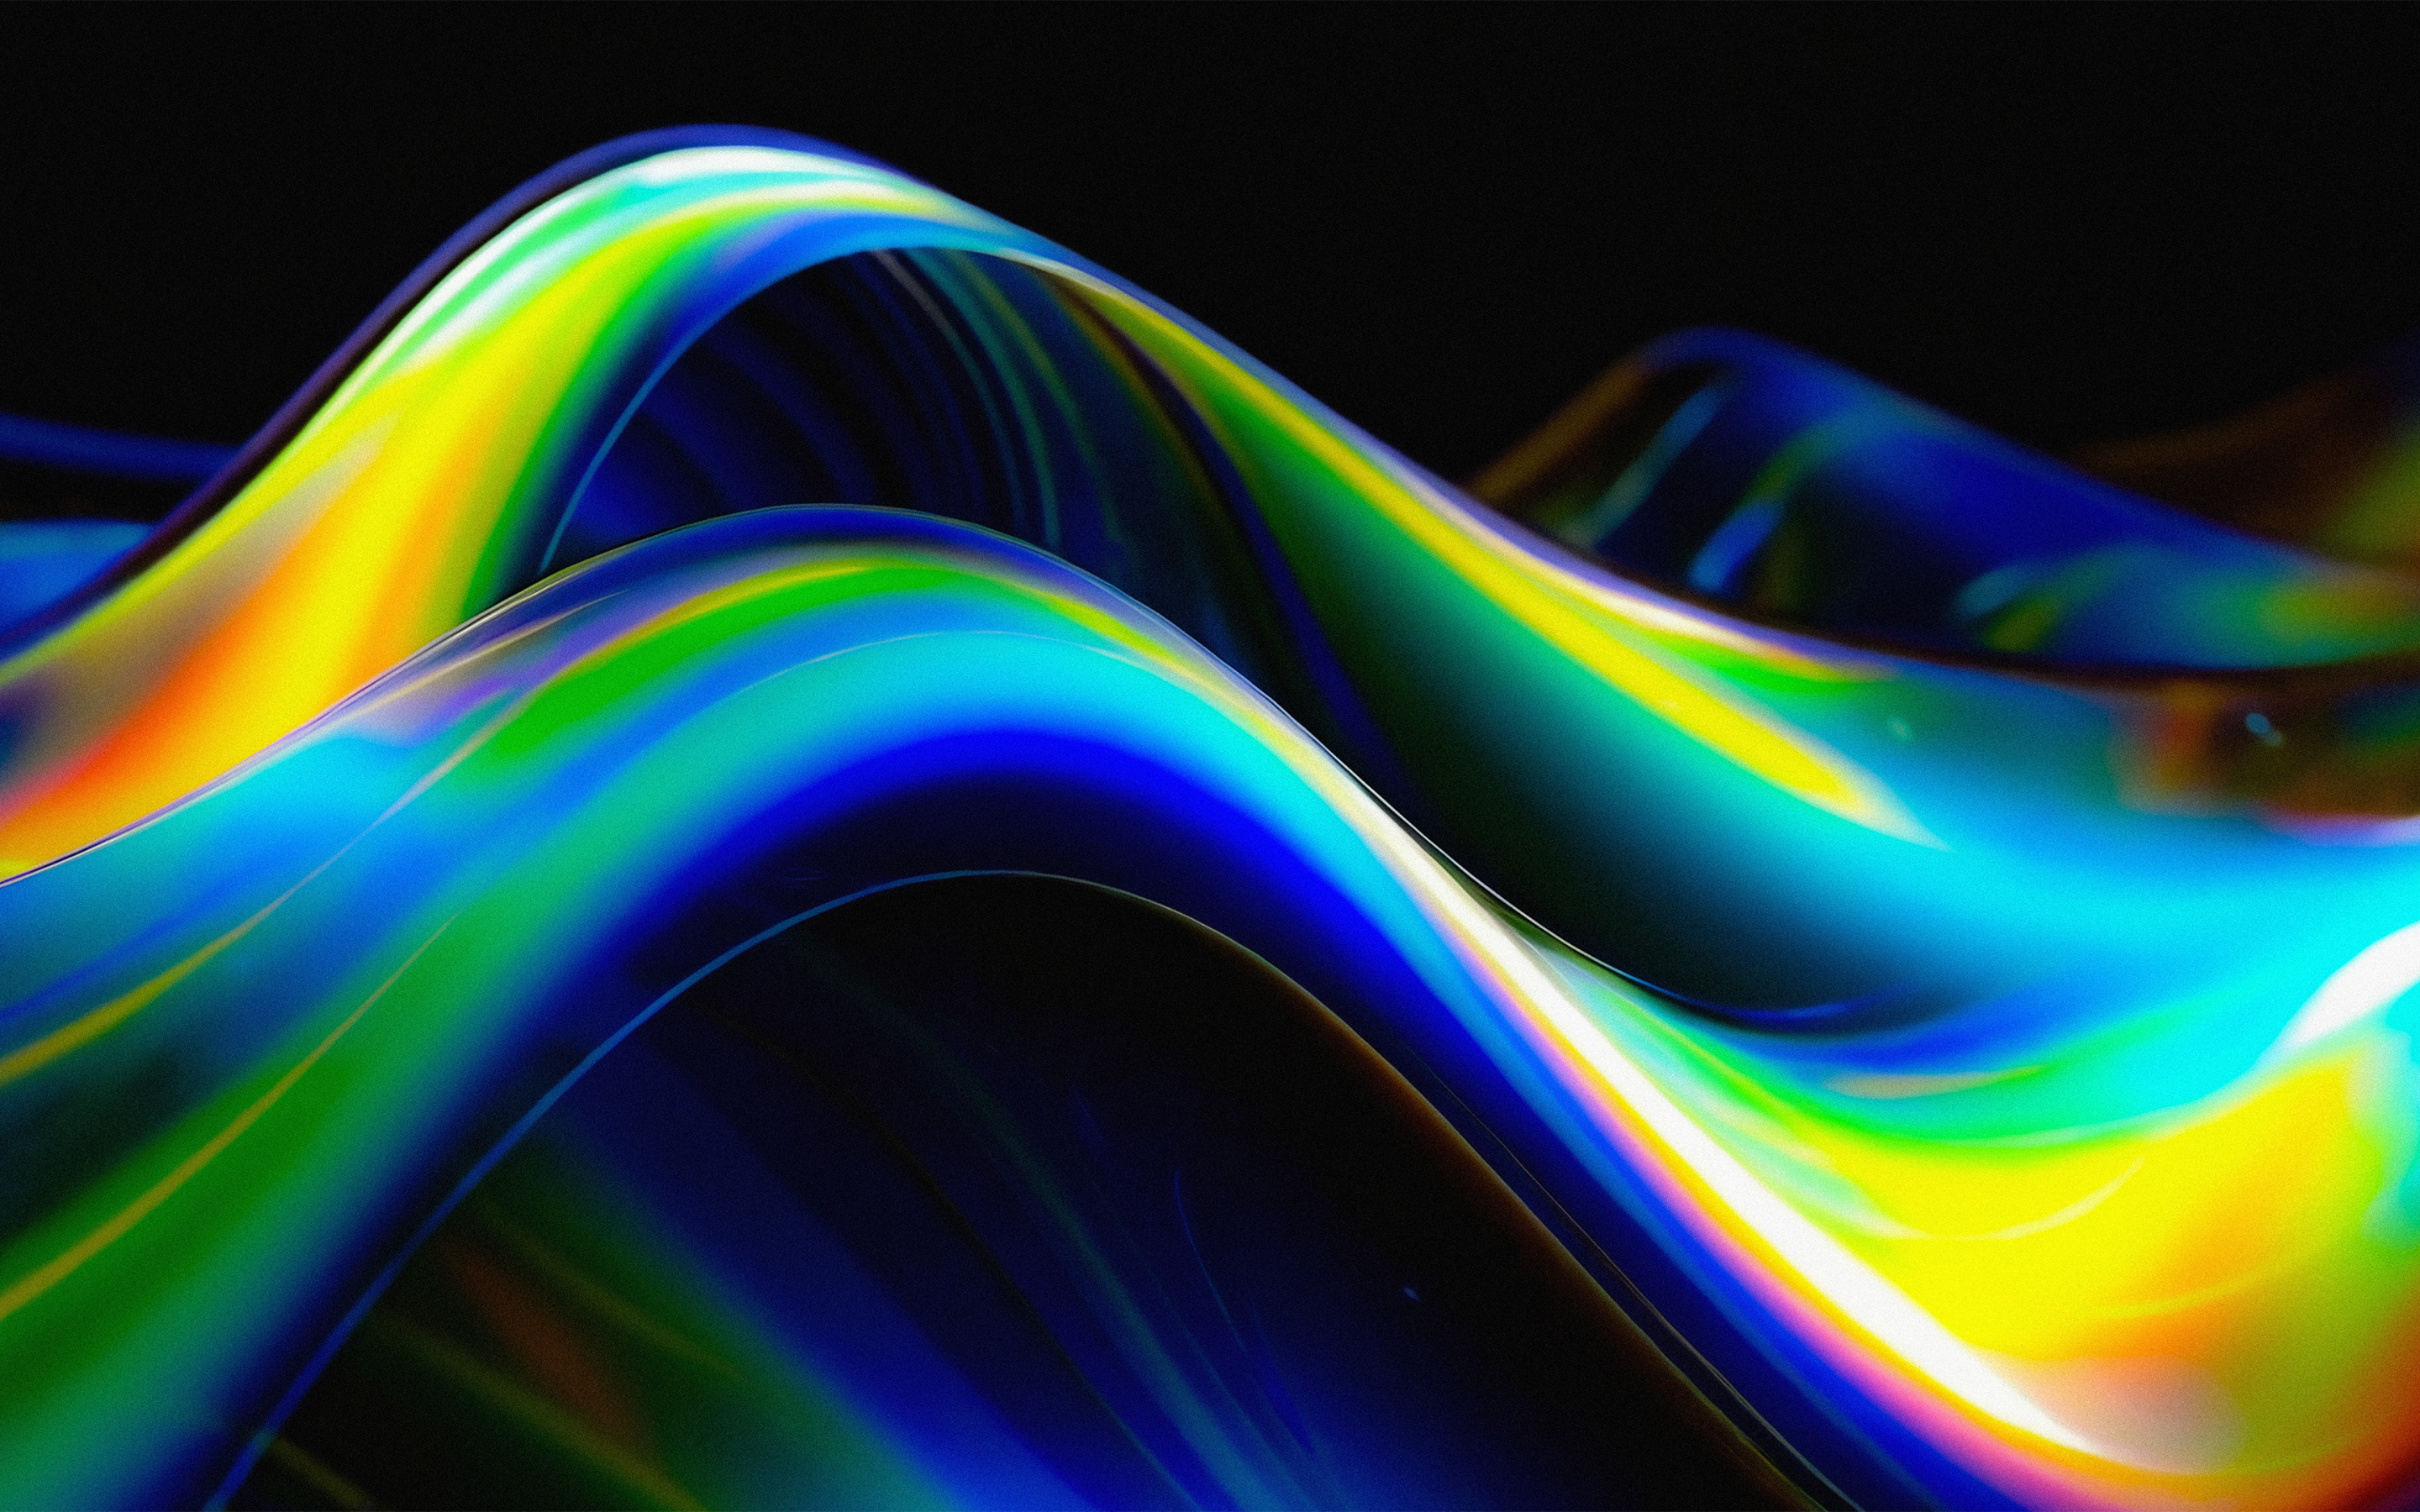 Wavy surface, abstract, colorful pattern, 2880x1800 wallpaper